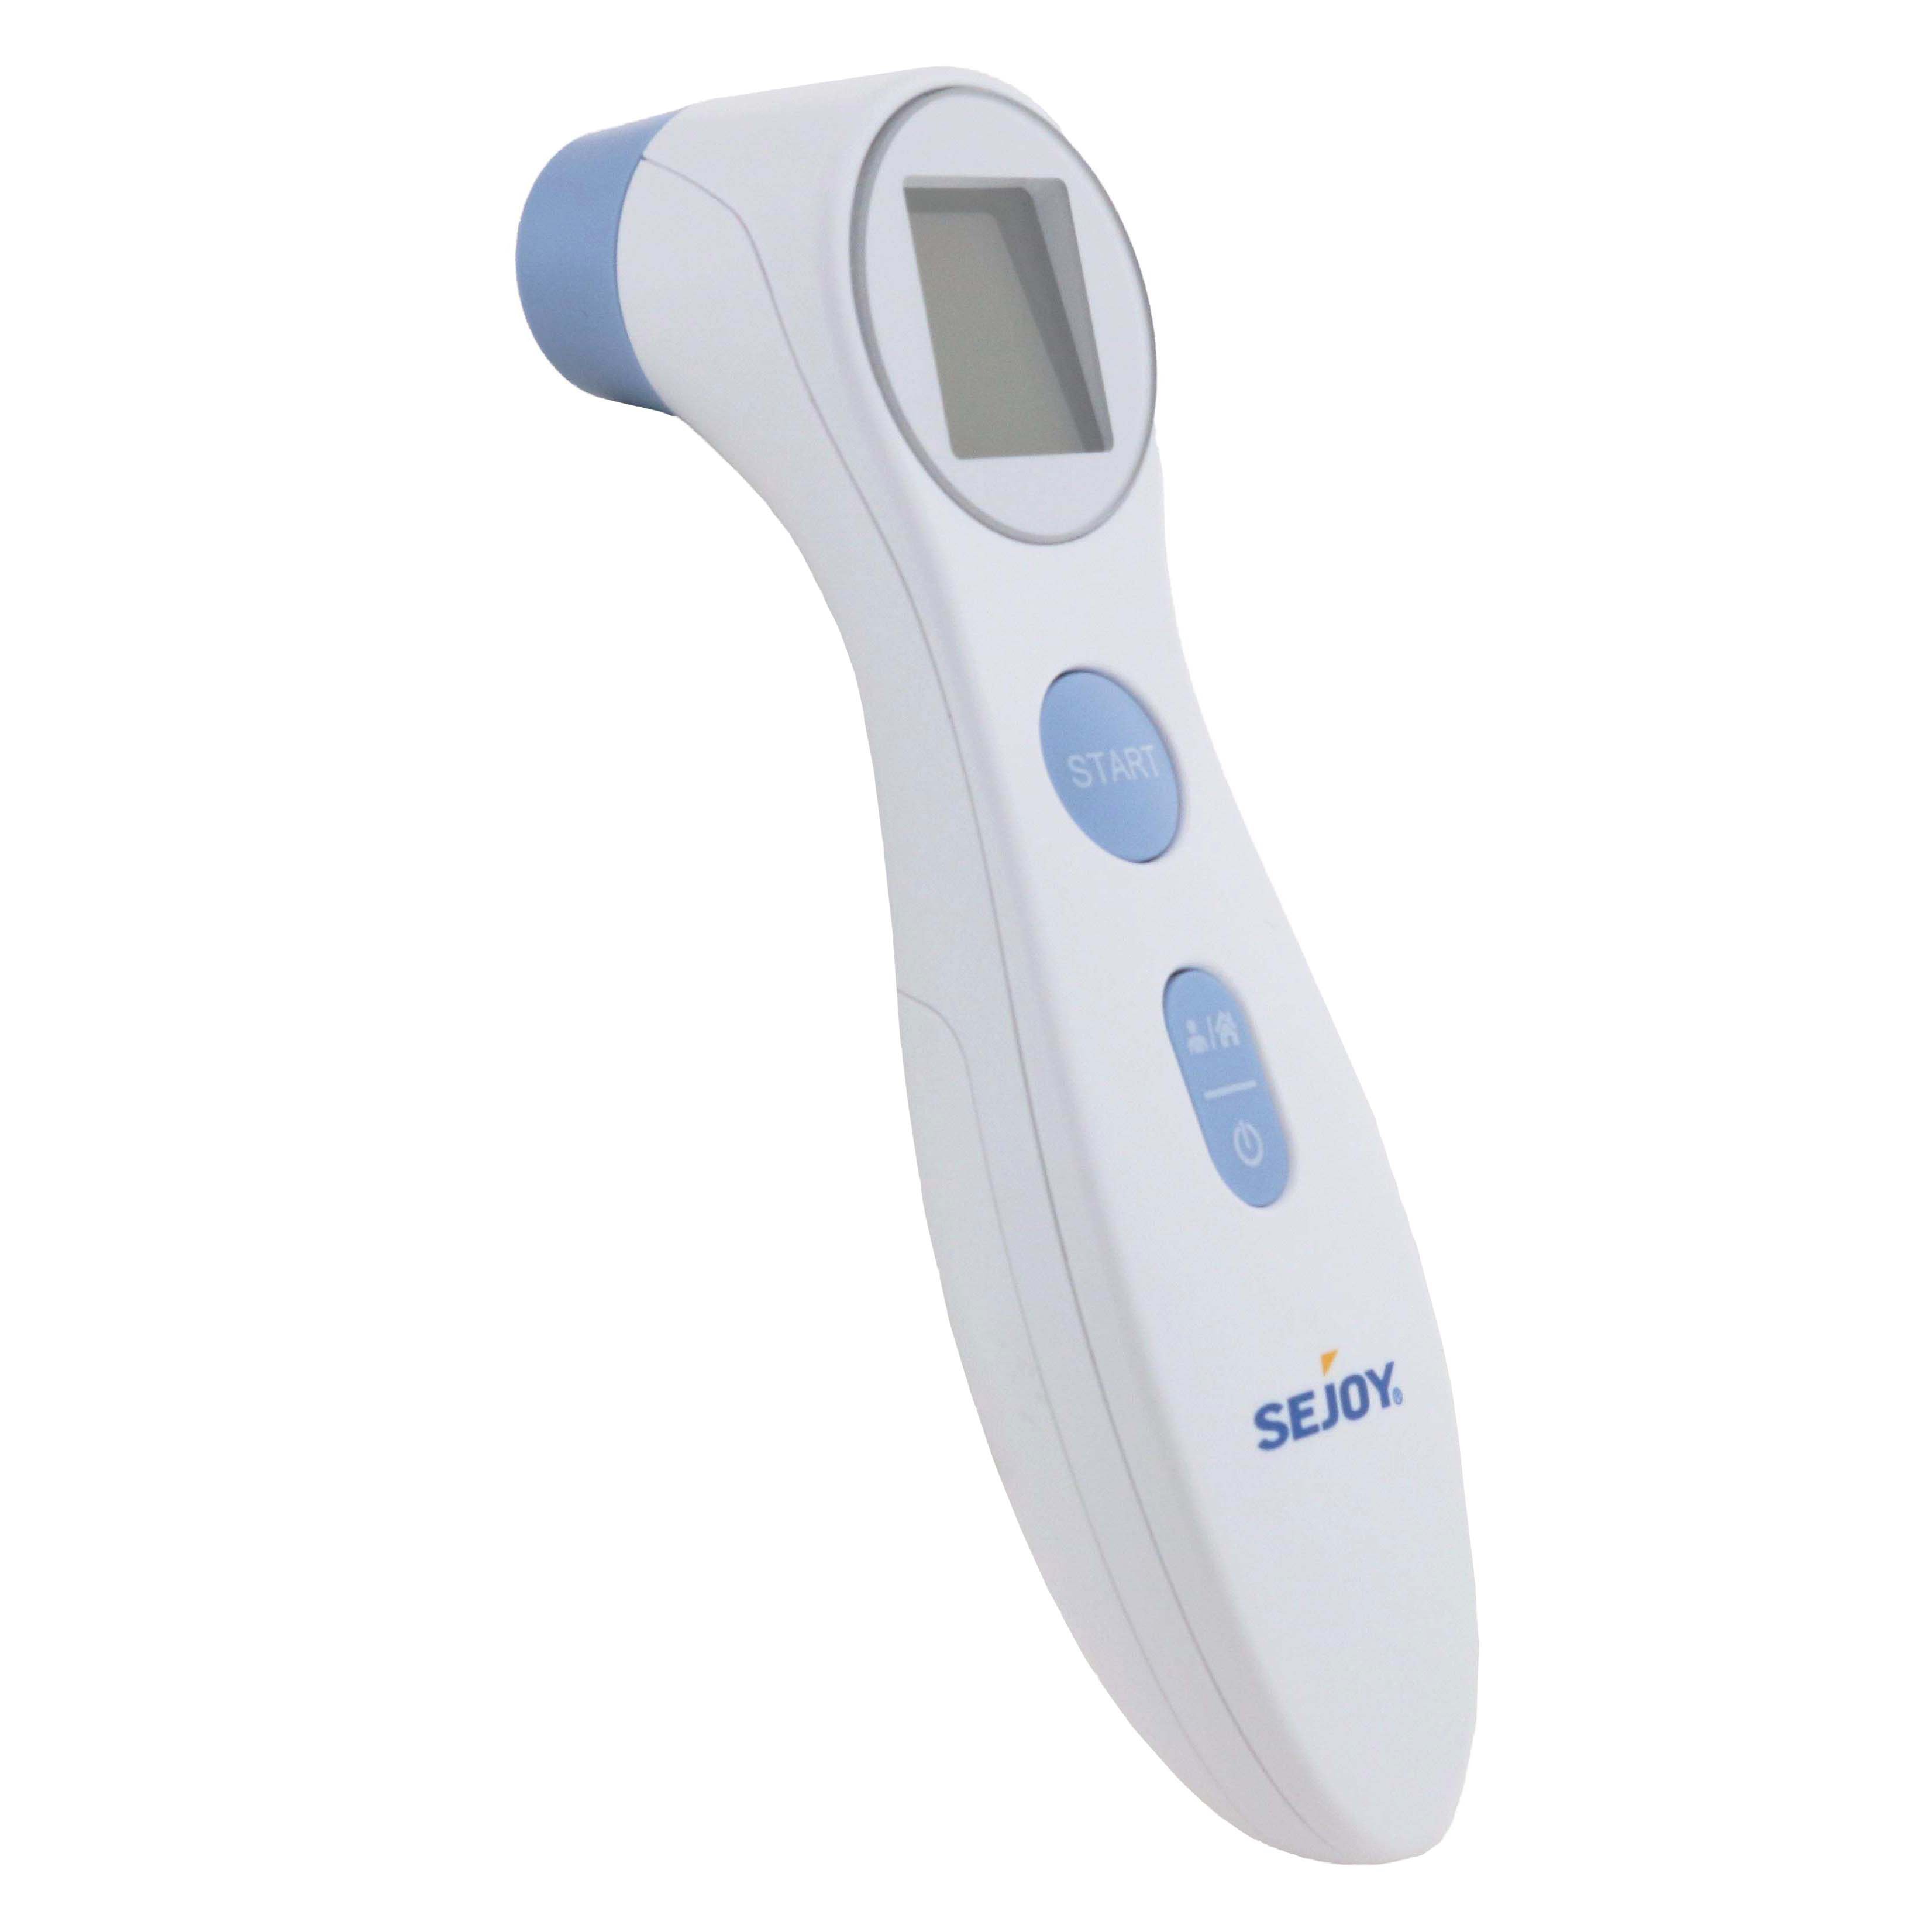 Sejoy Infrared Forehead Thermometer - Shop Medicines & Treatments at H-E-B